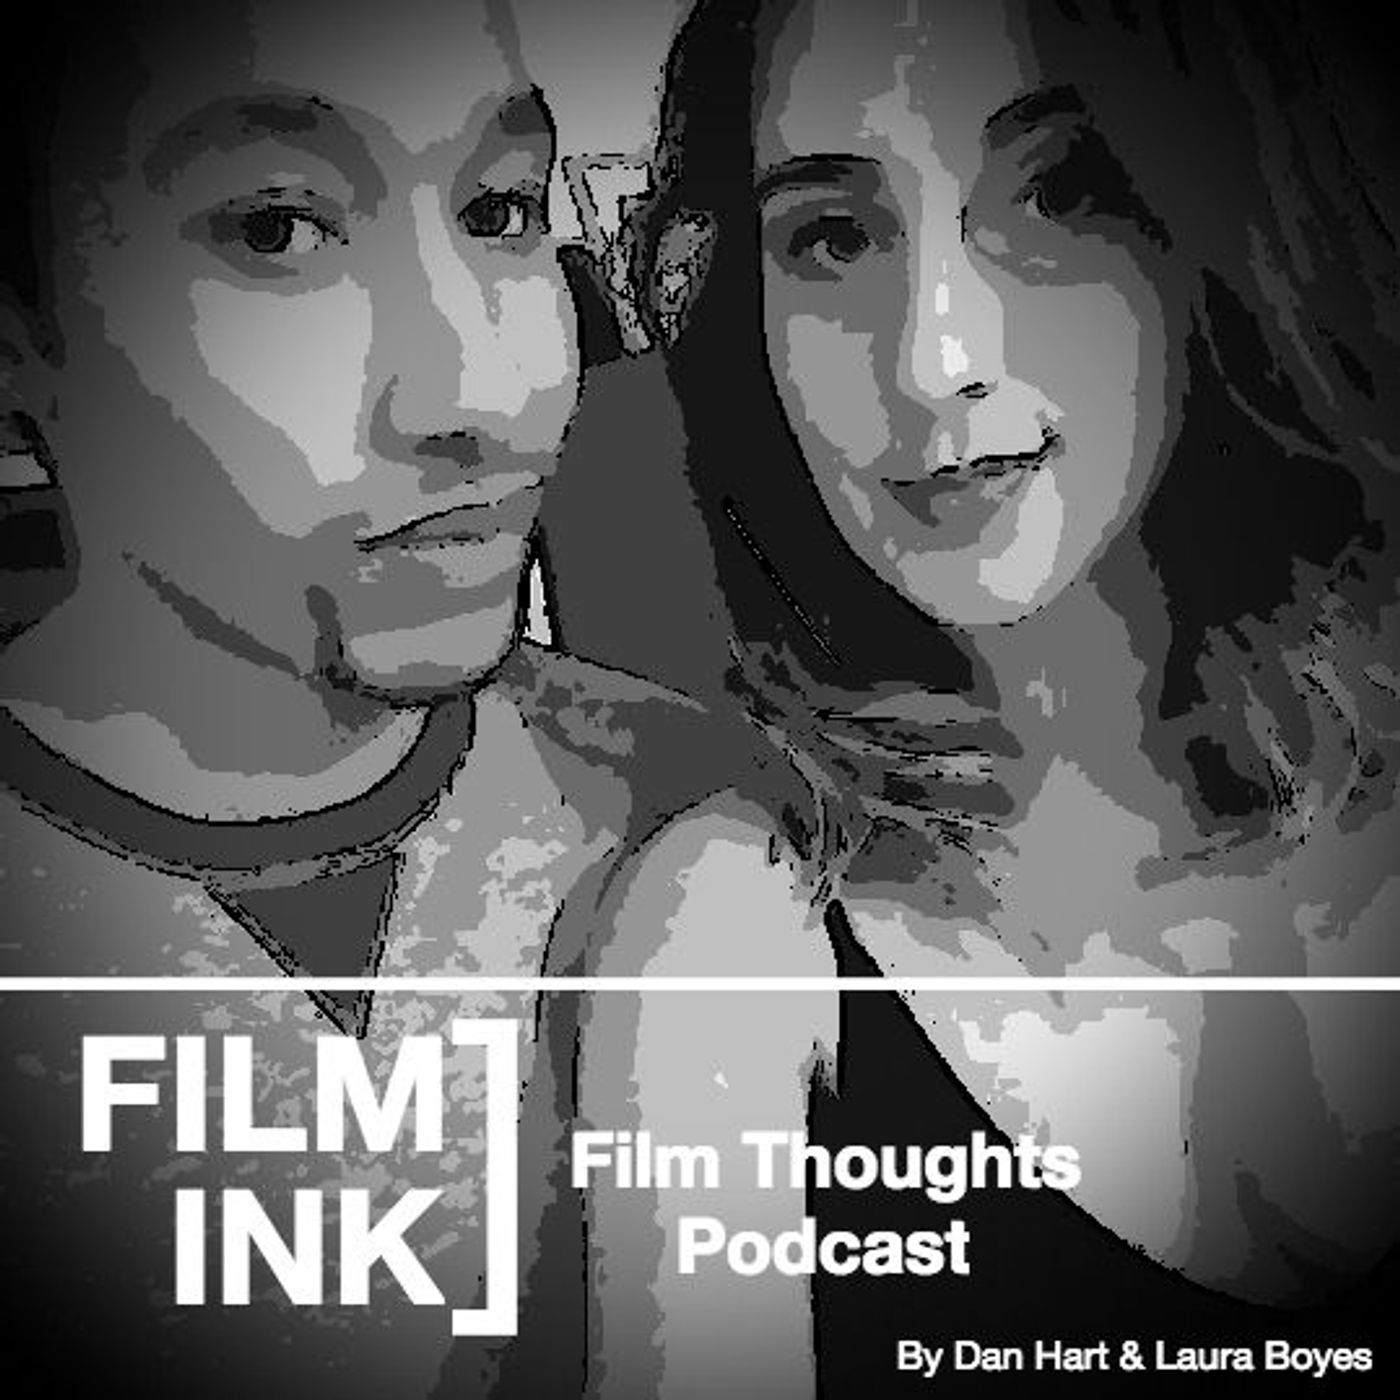 FilmInk Film Thoughts Podcast